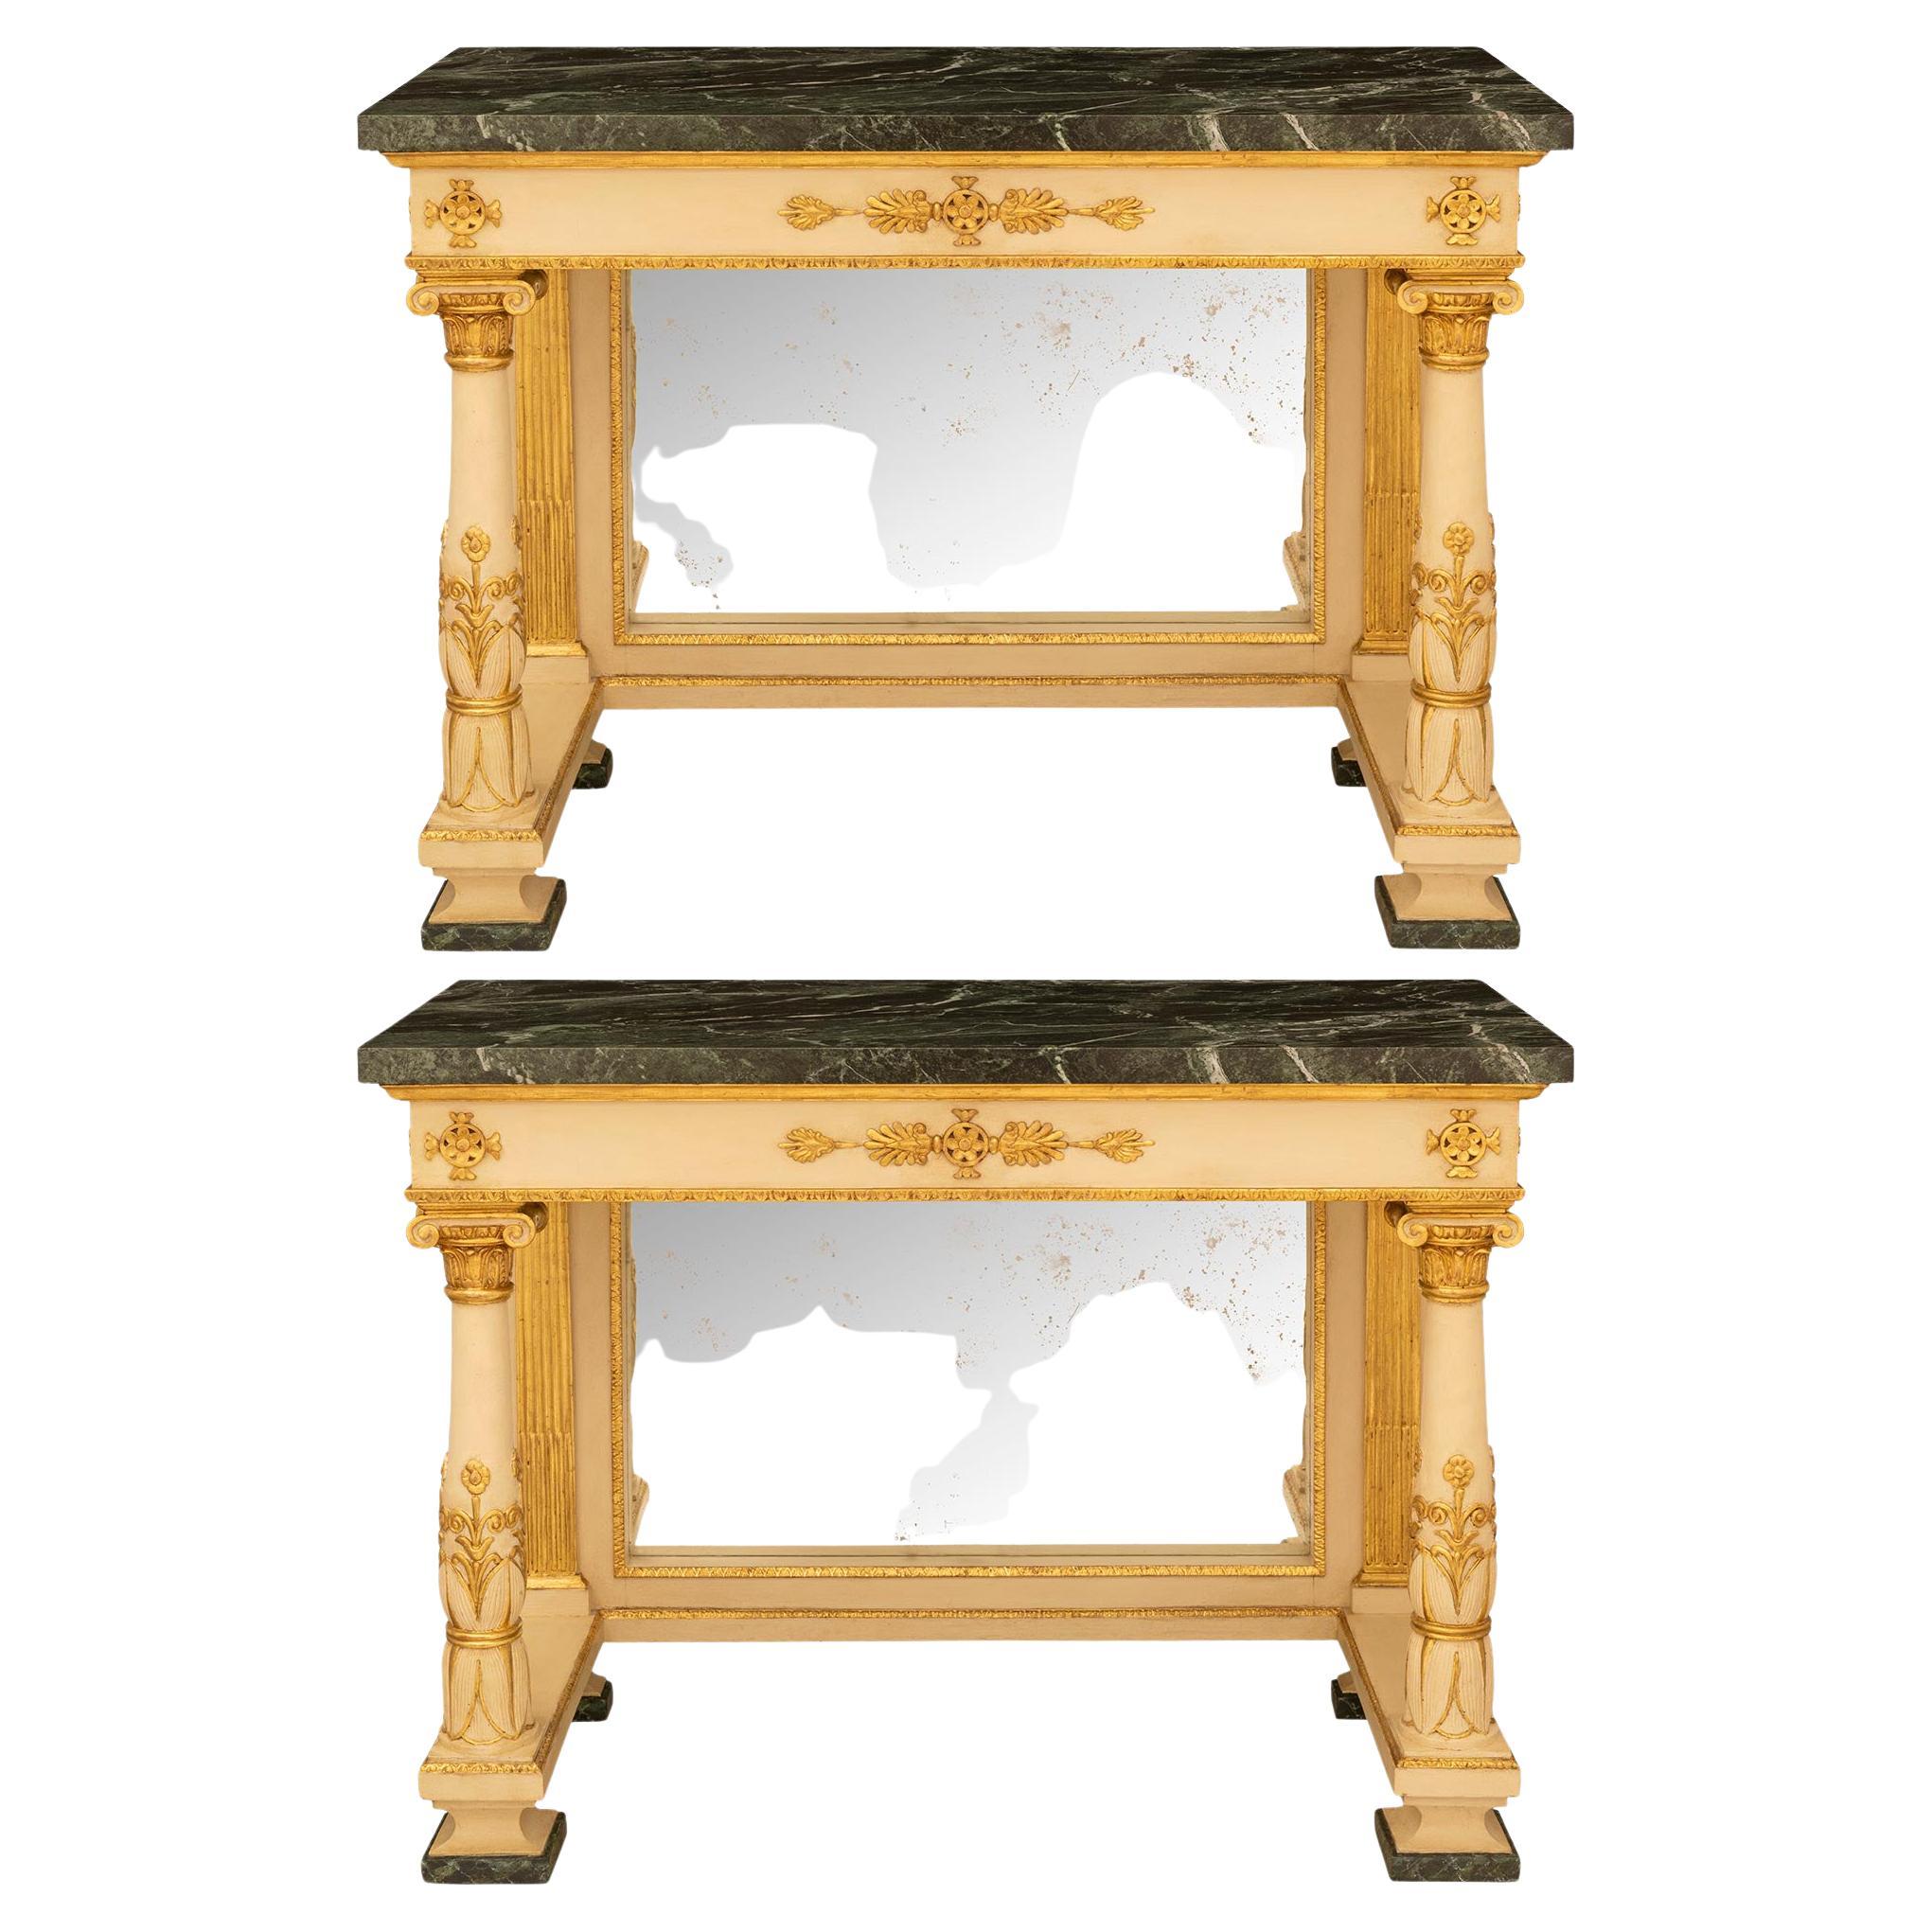 A pair of Italian 19th century Neo-Classical giltwood consoles